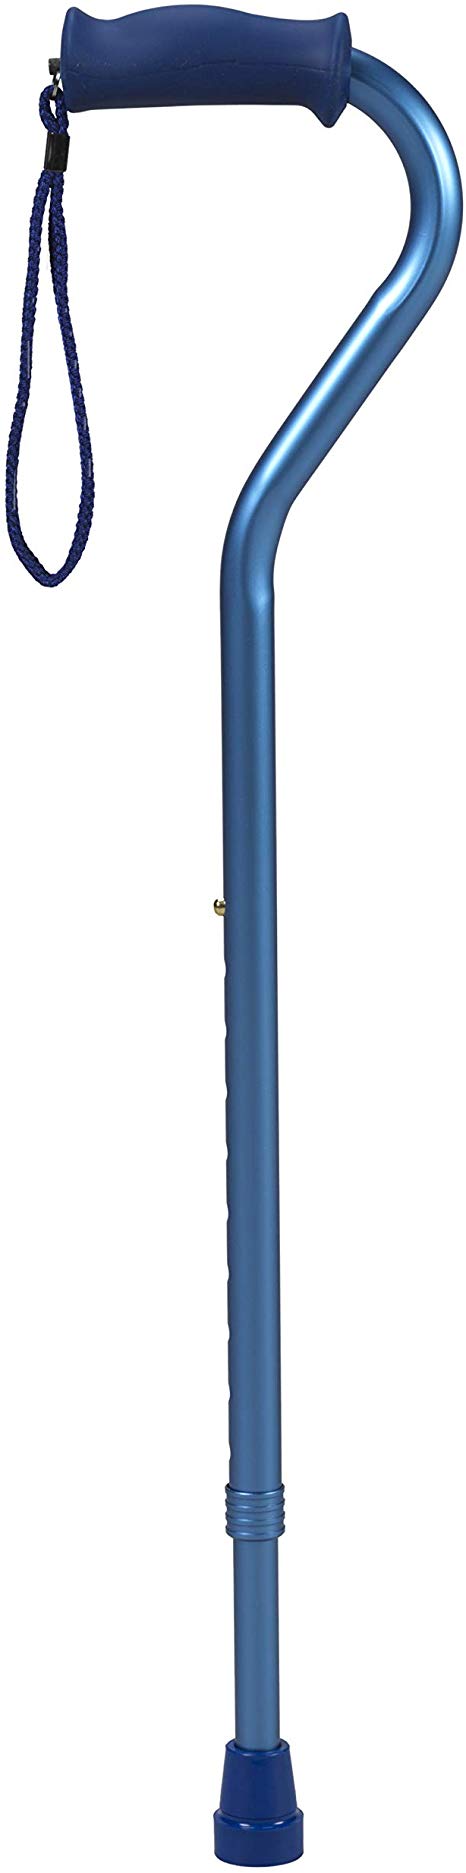 Offset Walking Cane, Height Adjustable, Senior Living Mobility Aid, Increased Stability and Support, Blue